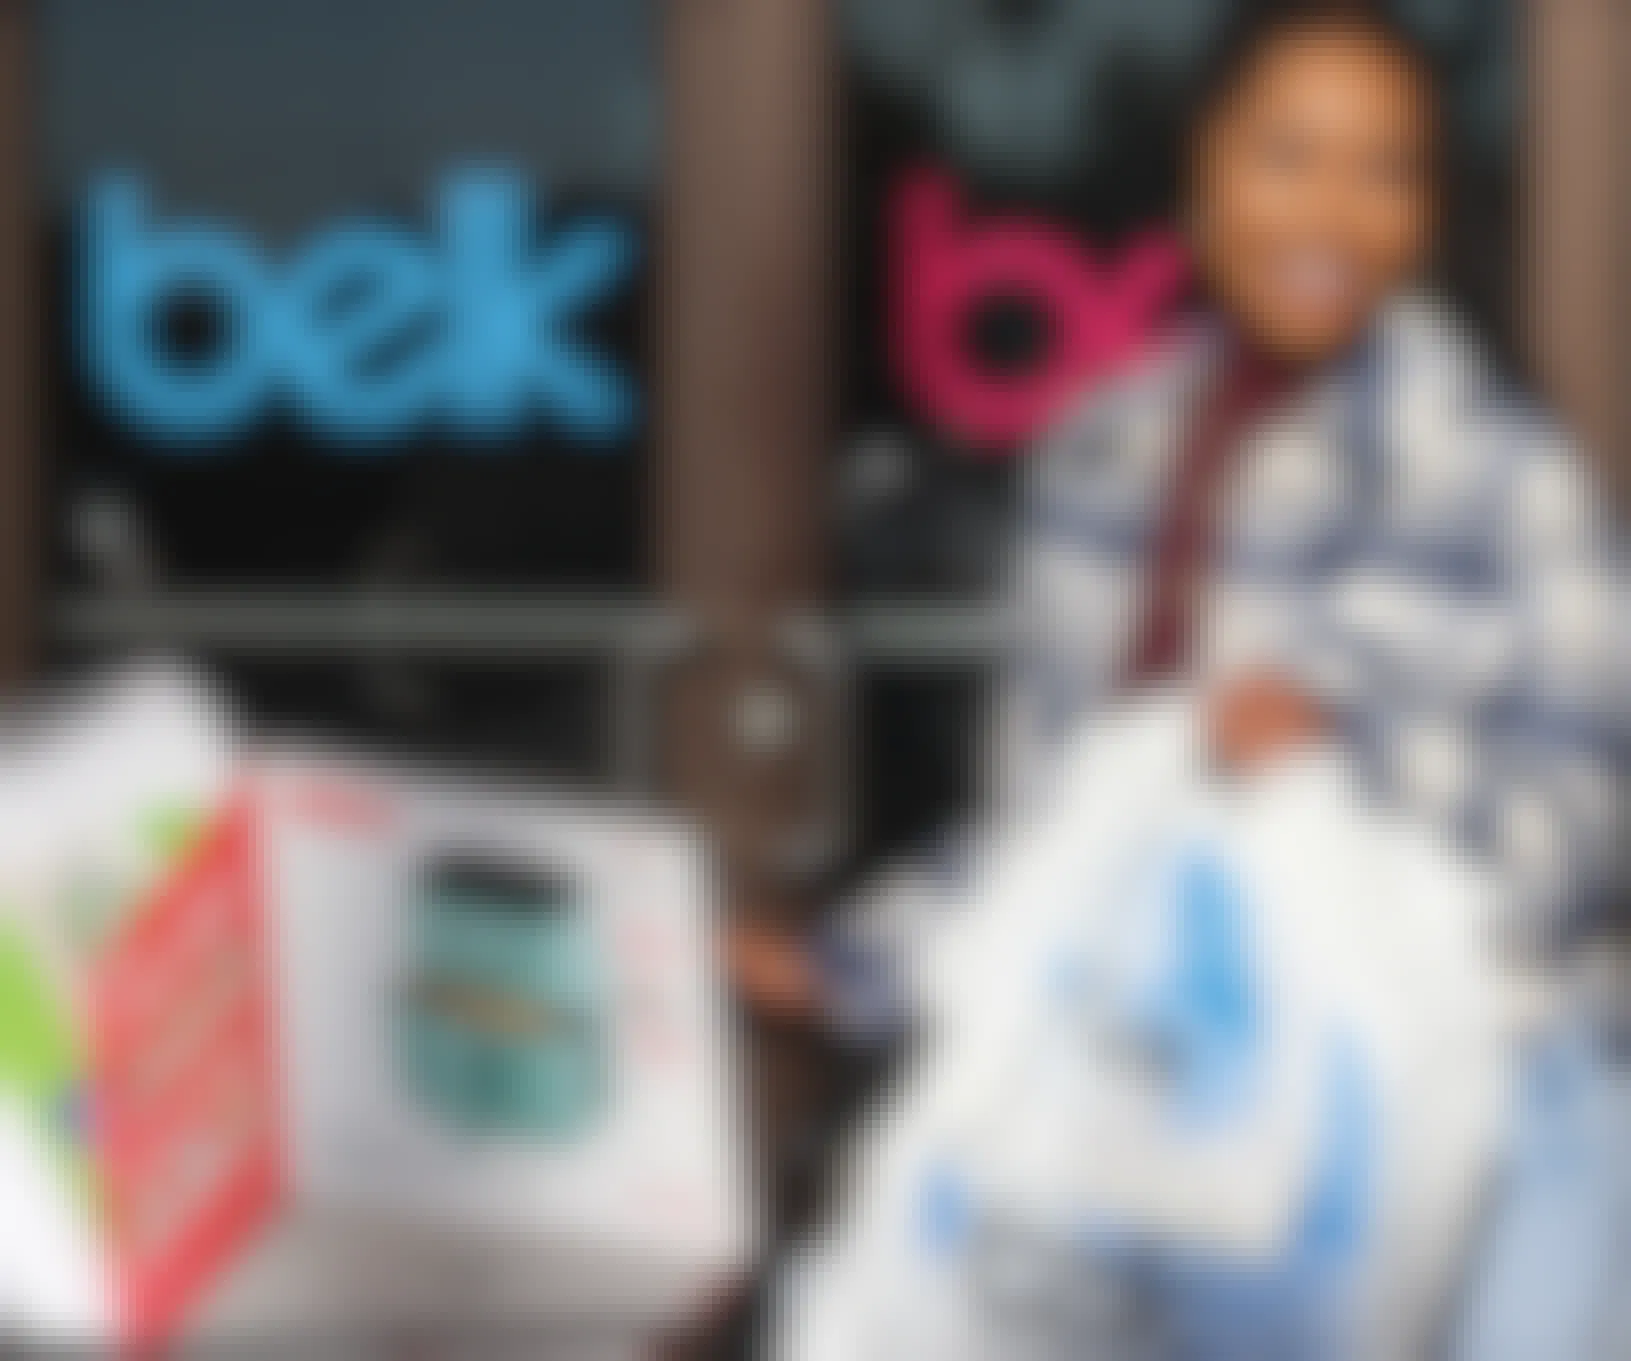 A customer leaving a Belk store carrying Belk bags and pushing a cart full of purchased items.